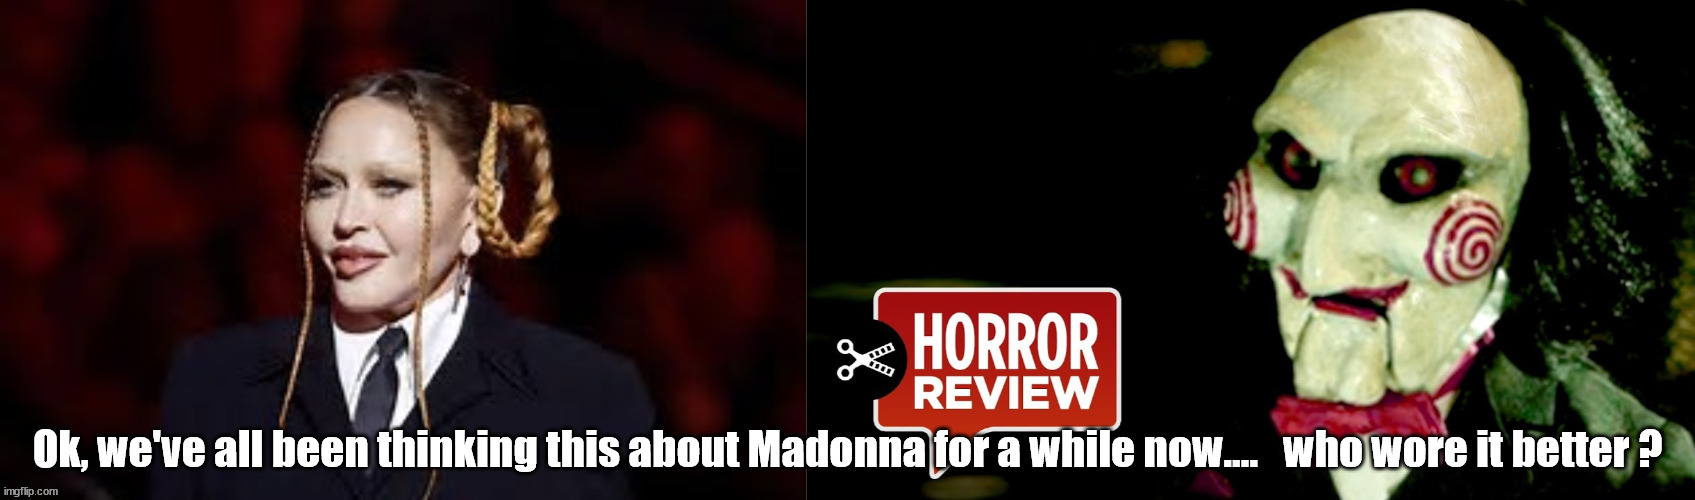 Madonna & Saw. Who wore it better? | image tagged in funny | made w/ Imgflip meme maker